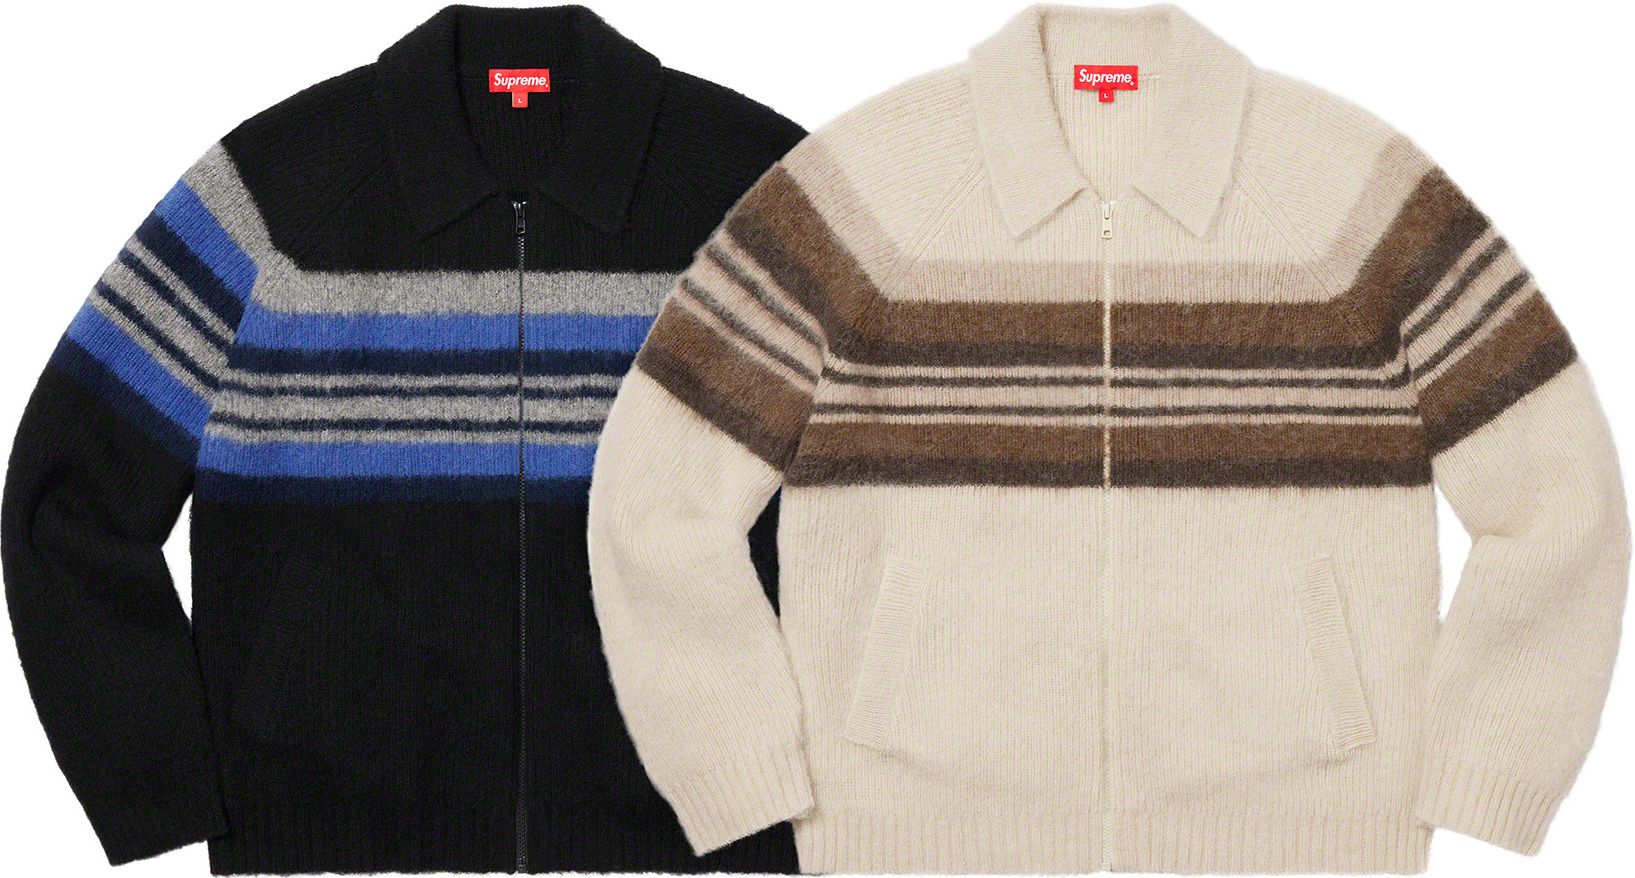 Brushed Wool Zip Up Sweater - Fall/Winter 2019 Preview – Supreme